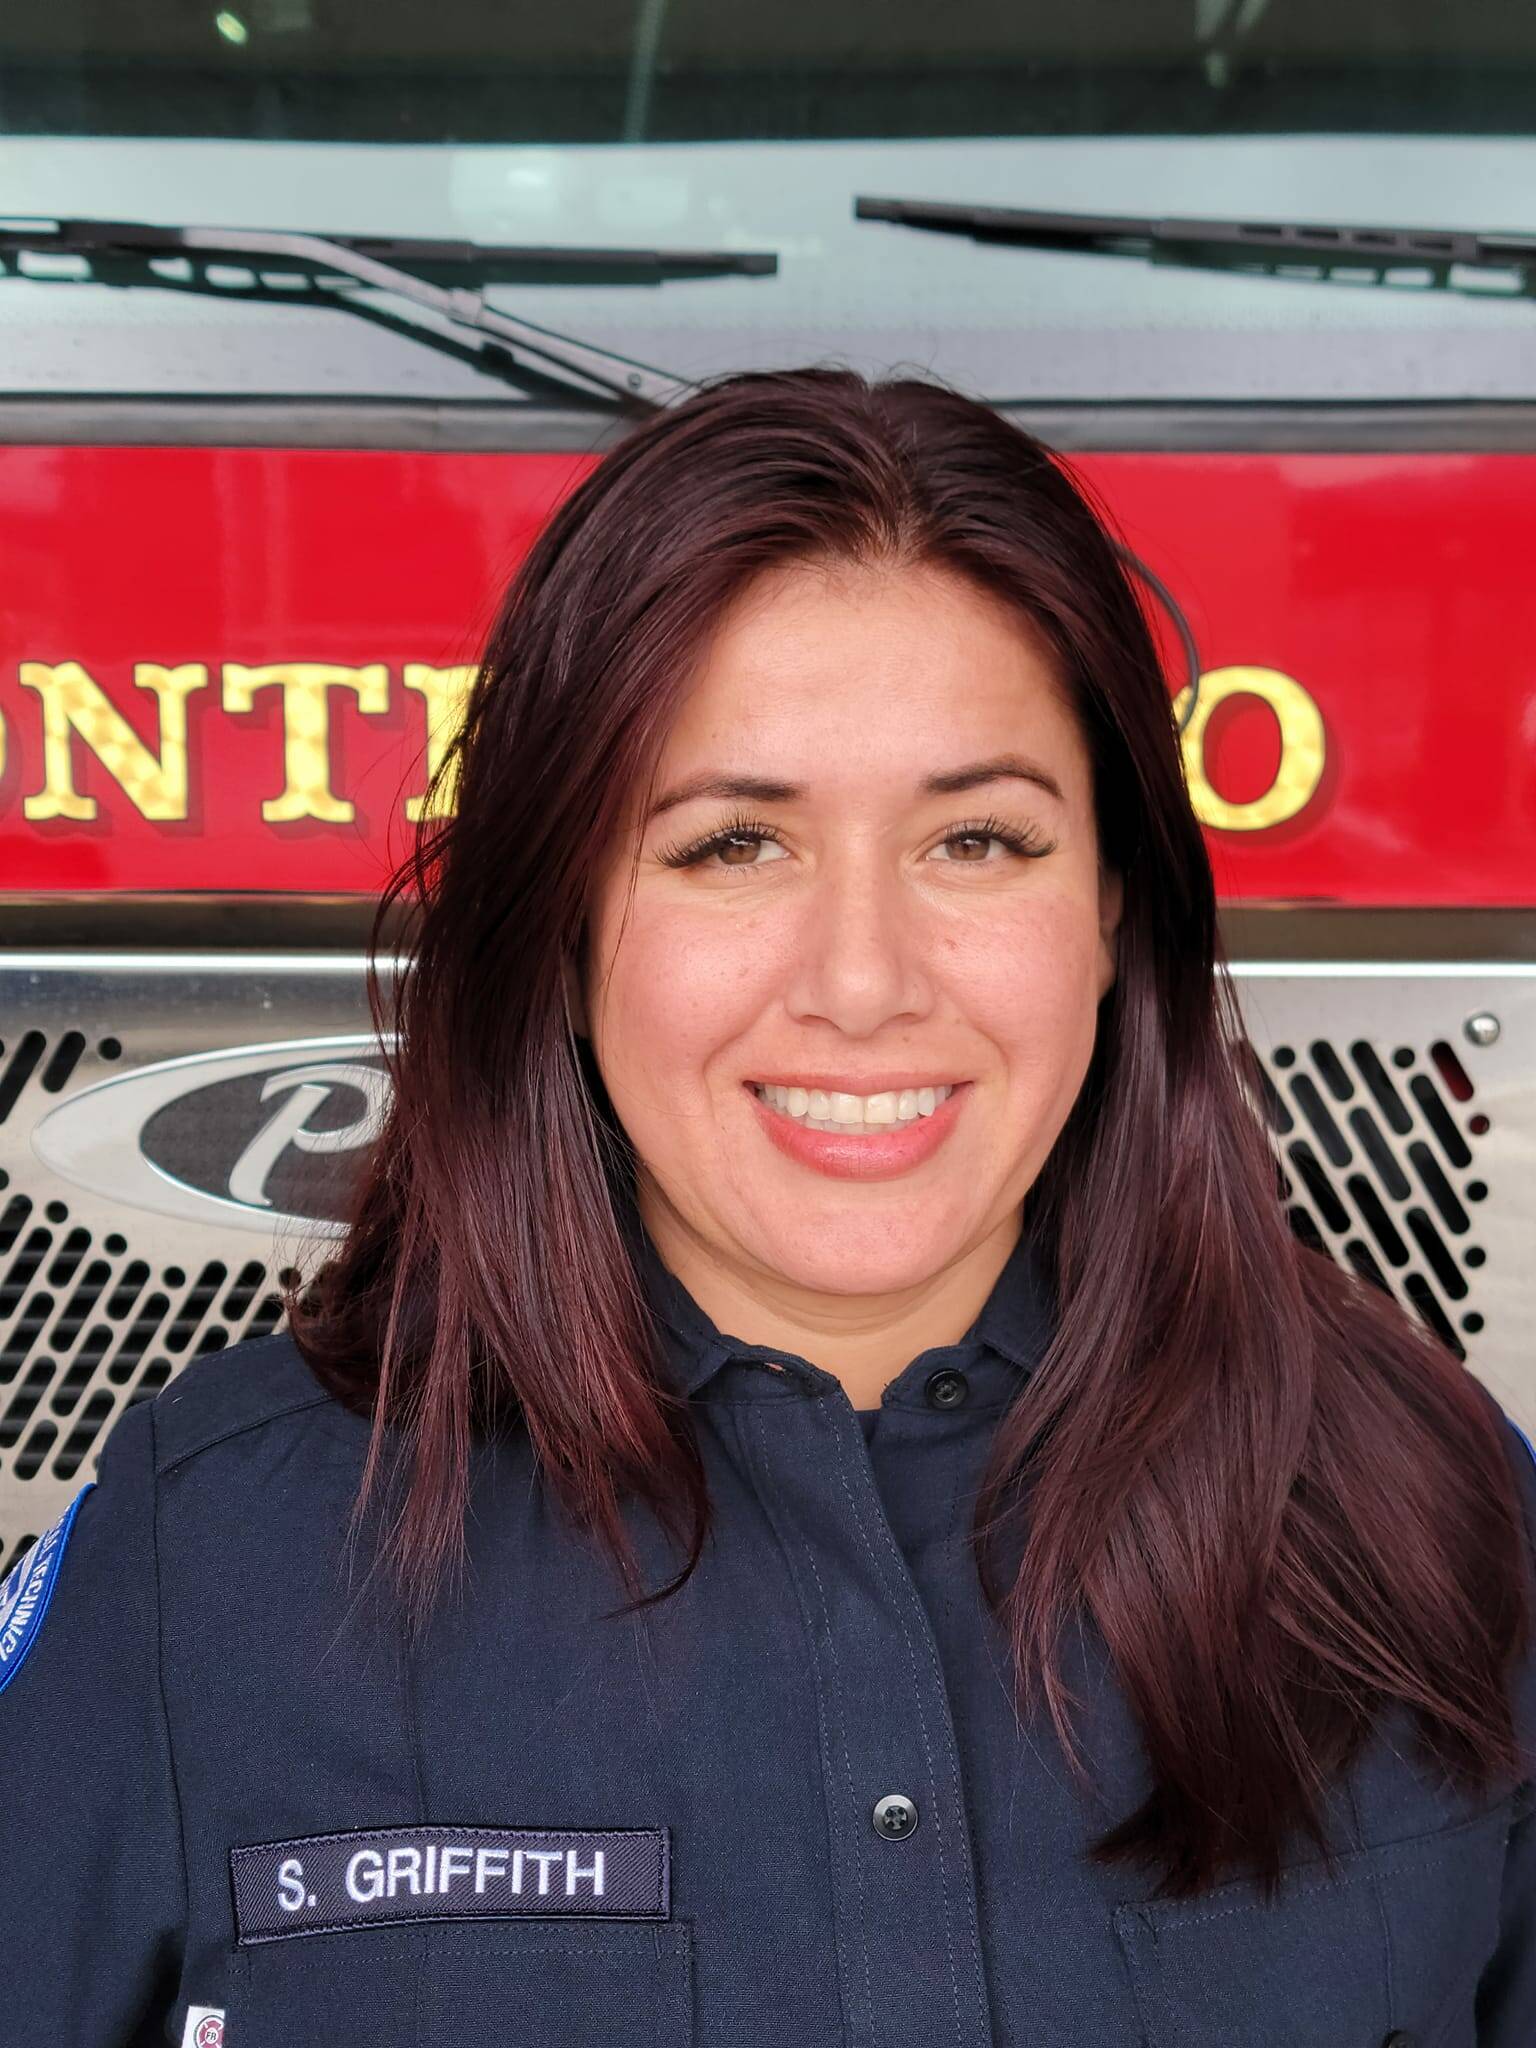 Sierra Griffith joined the Montesano Fire Department as their first female career firefighter in March. Photo: MFD